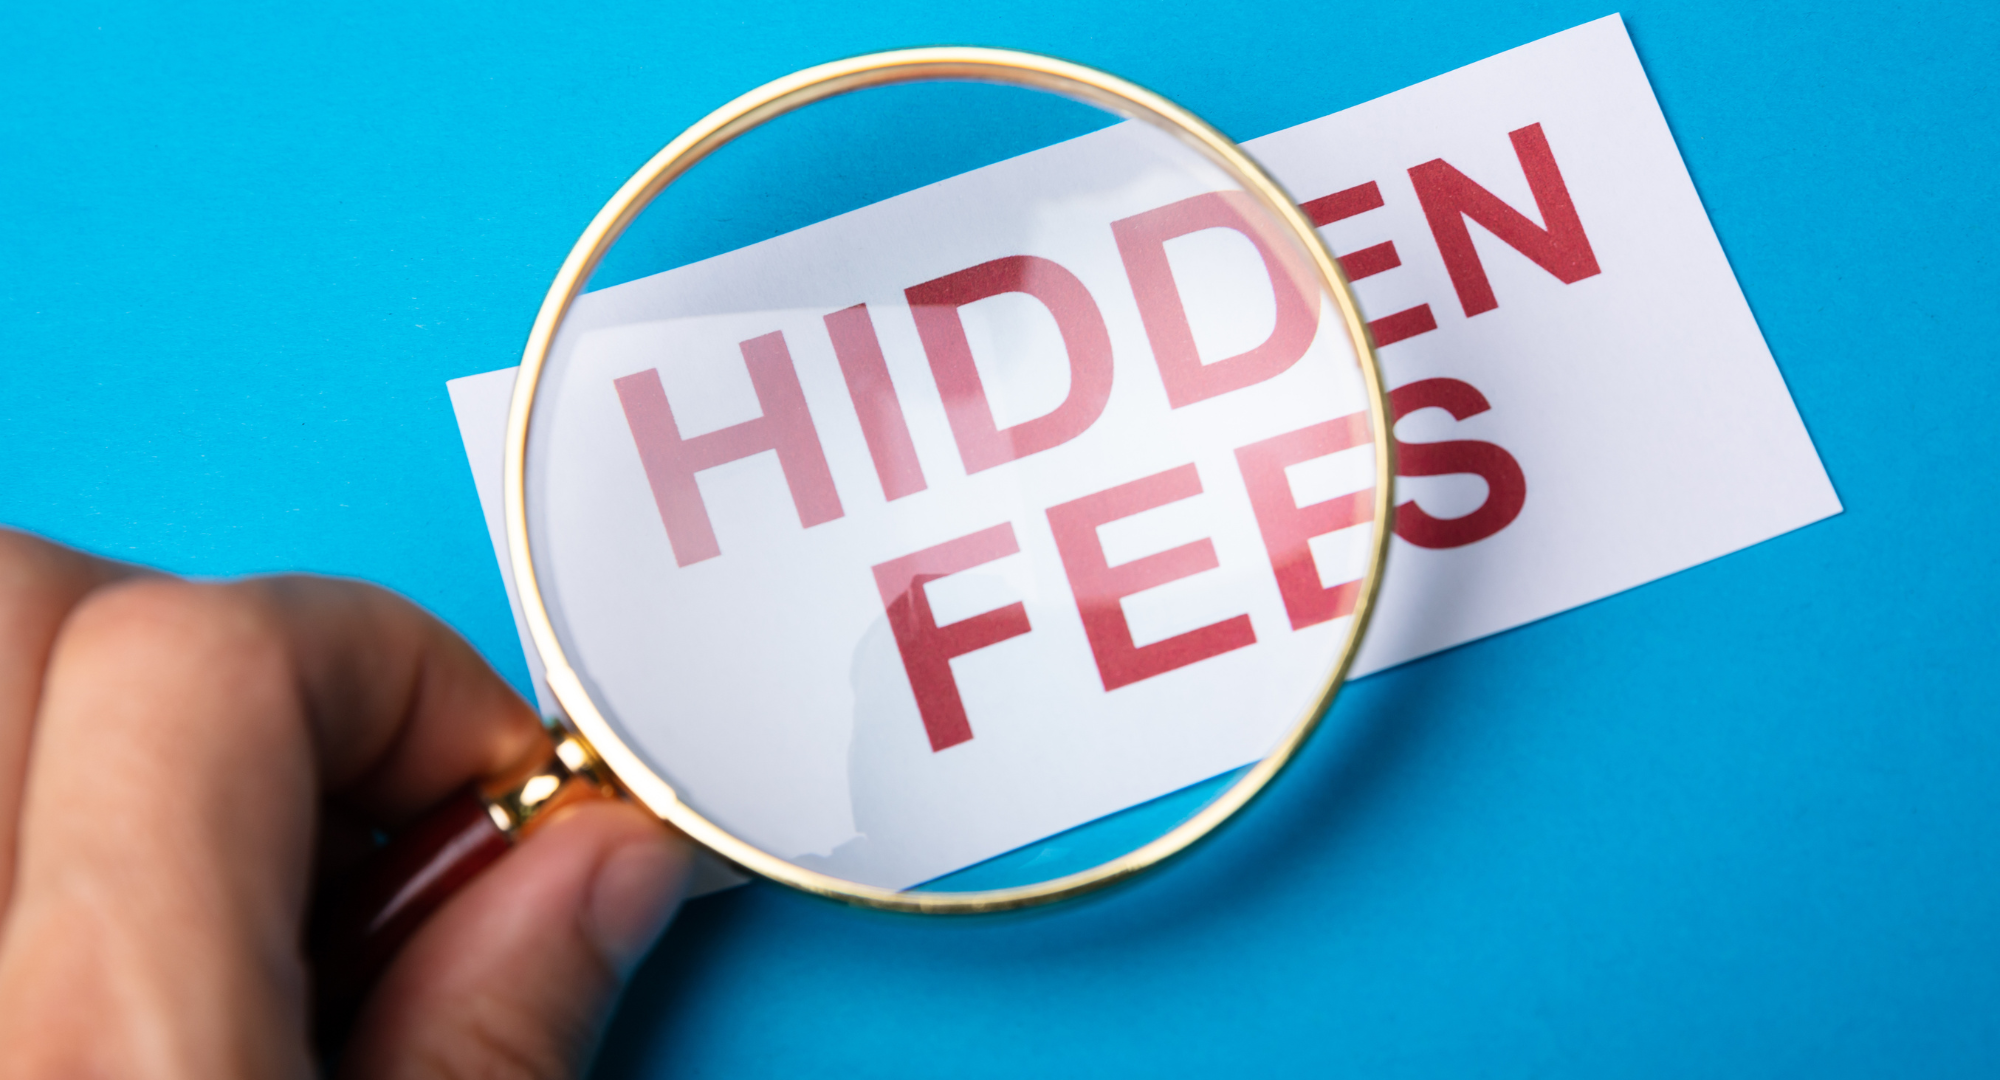 Magnifying glass searching for "hidden fees" in a Logistics RFP. Don't miss out! Read our guide to uncovering hidden costs.